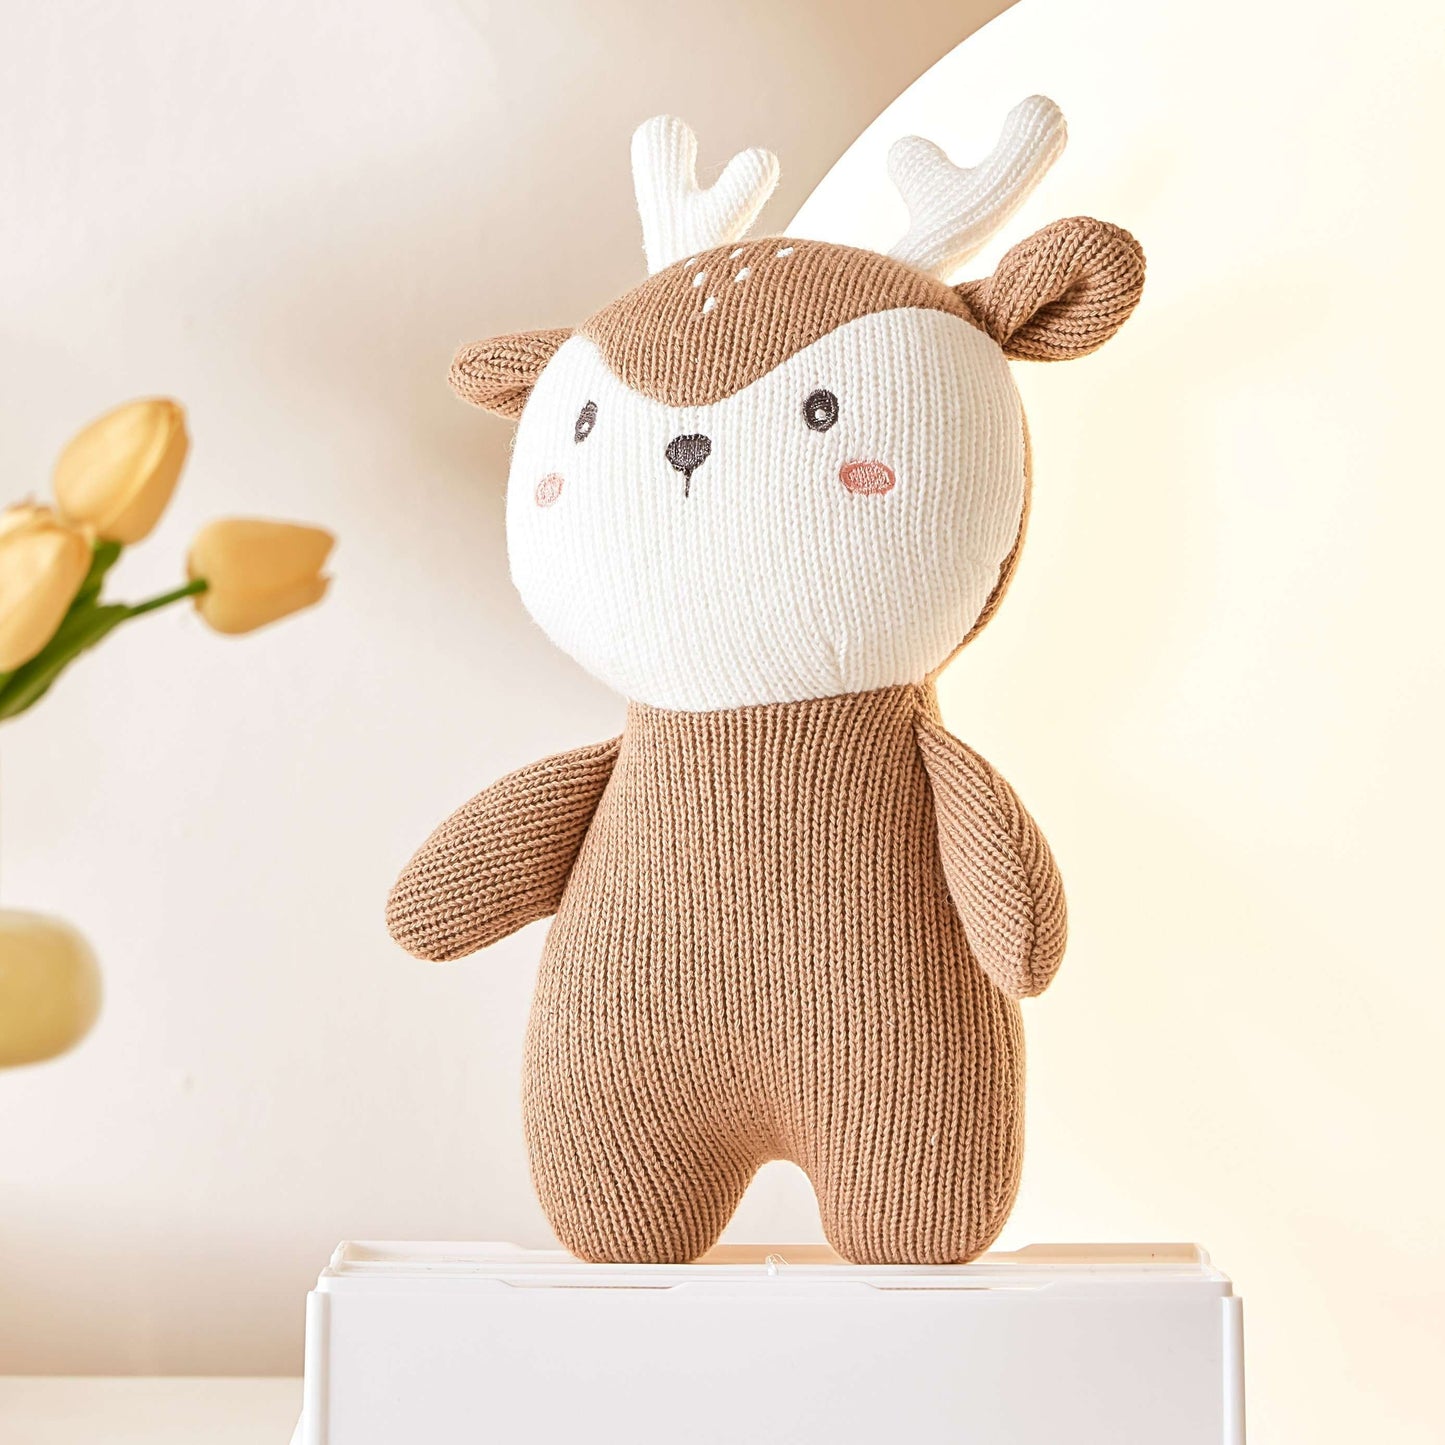 Lovely and Charming Stuffed Animal